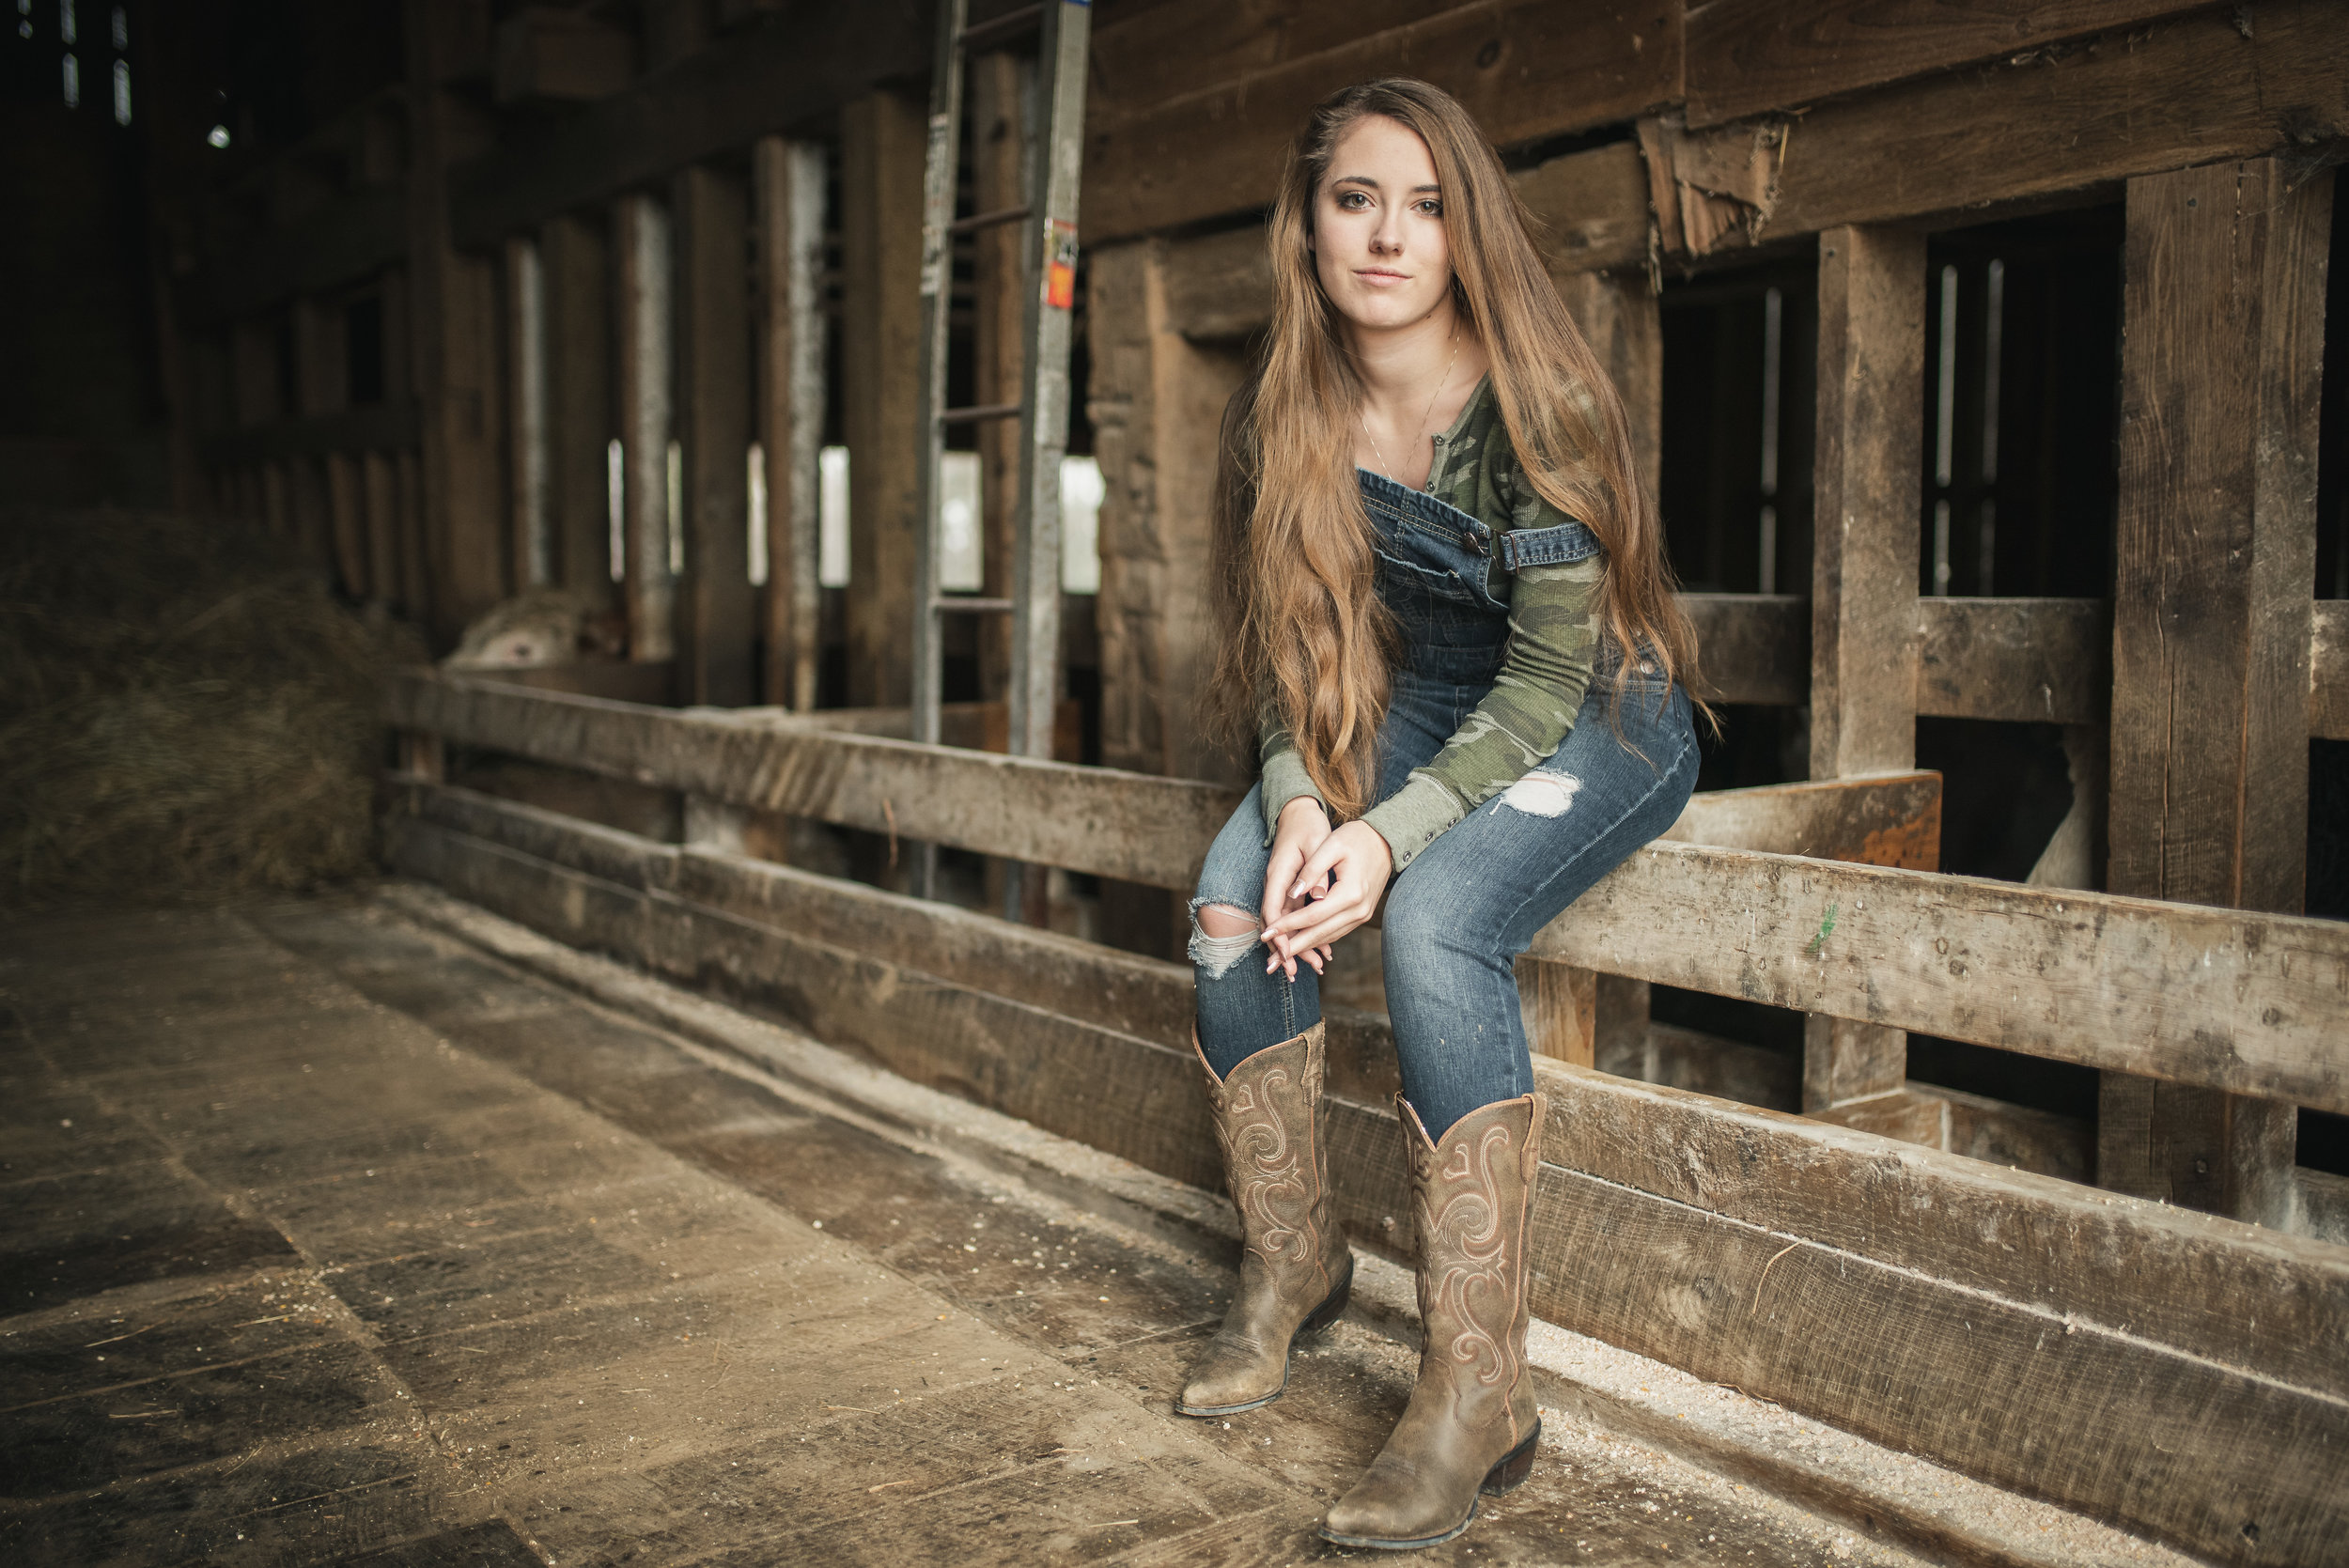 Cowboy Boots, Overalls, and Long Hair